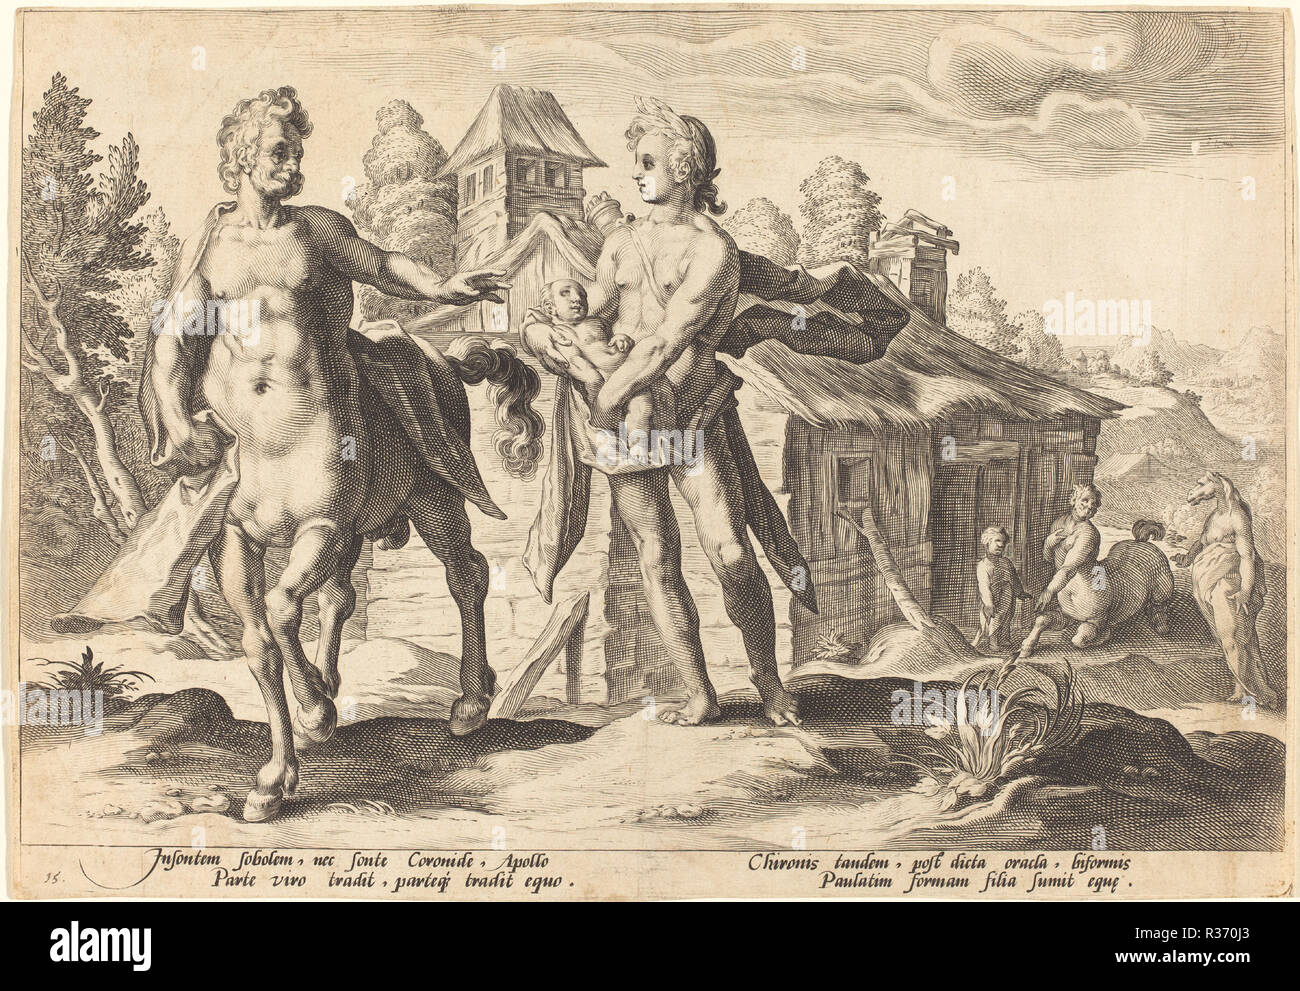 Apollo Entrusting Chiron with the Education of Asclepius. Dimensions: overall: 17.9 x 25.4 cm (7 1/16 x 10 in.). Medium: engraving on laid paper. Museum: National Gallery of Art, Washington DC. Author: Workshop of Hendrick Goltzius, after Hendrick Goltzius. Dutch 16th Century after Hendrik Goltzius. Stock Photo